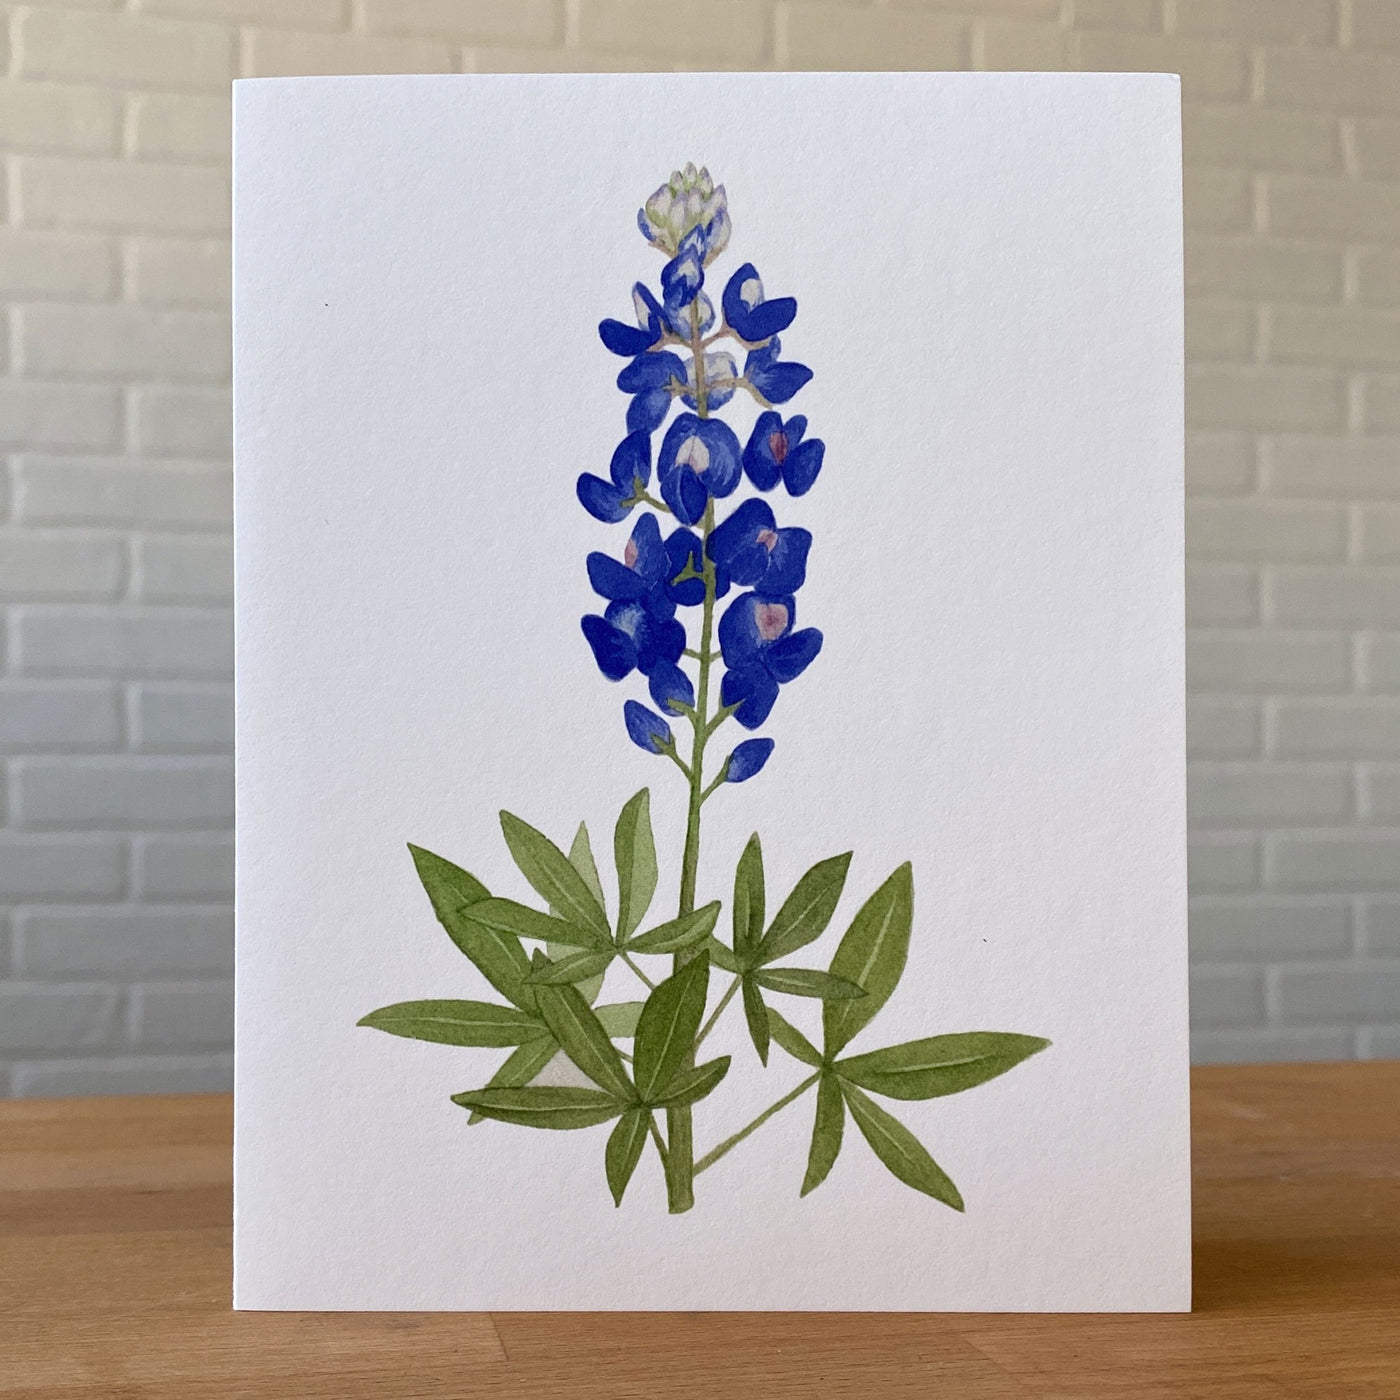 Watercolor Card with Lupine Flower